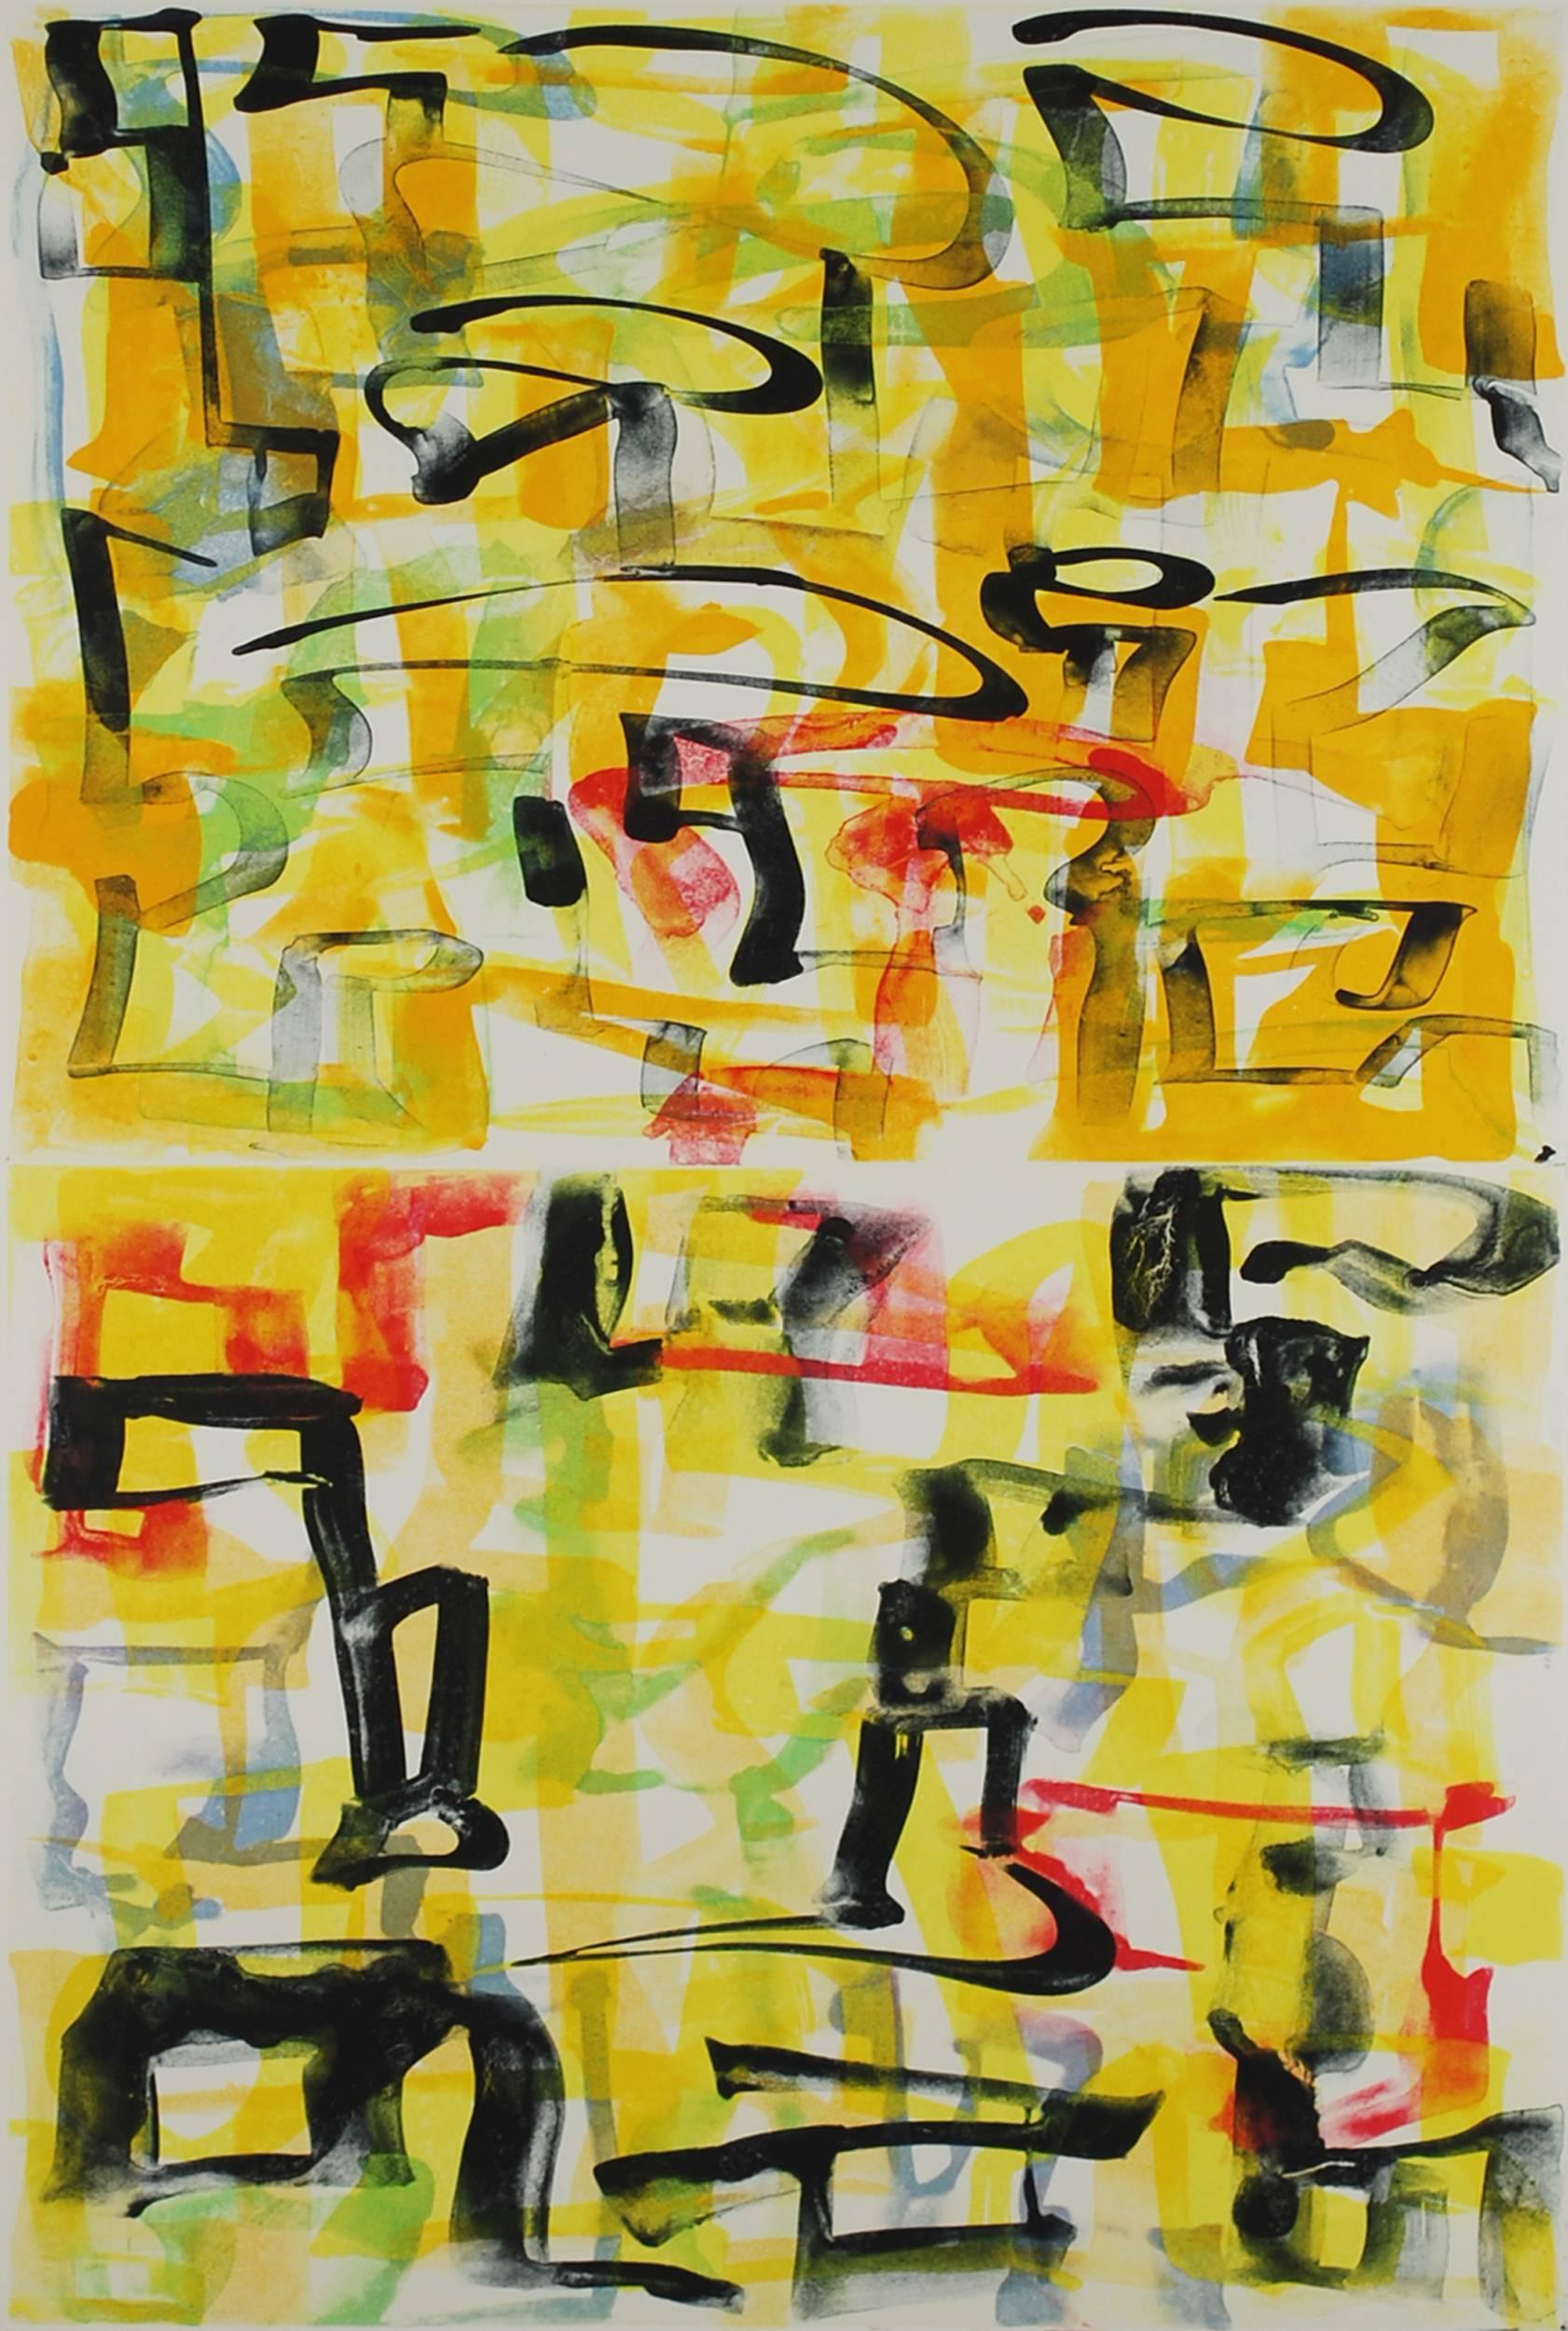 Melissa Meyer Abstract Print - "The Chief VI", abstract gestural monoprint, yellow, red, green, black